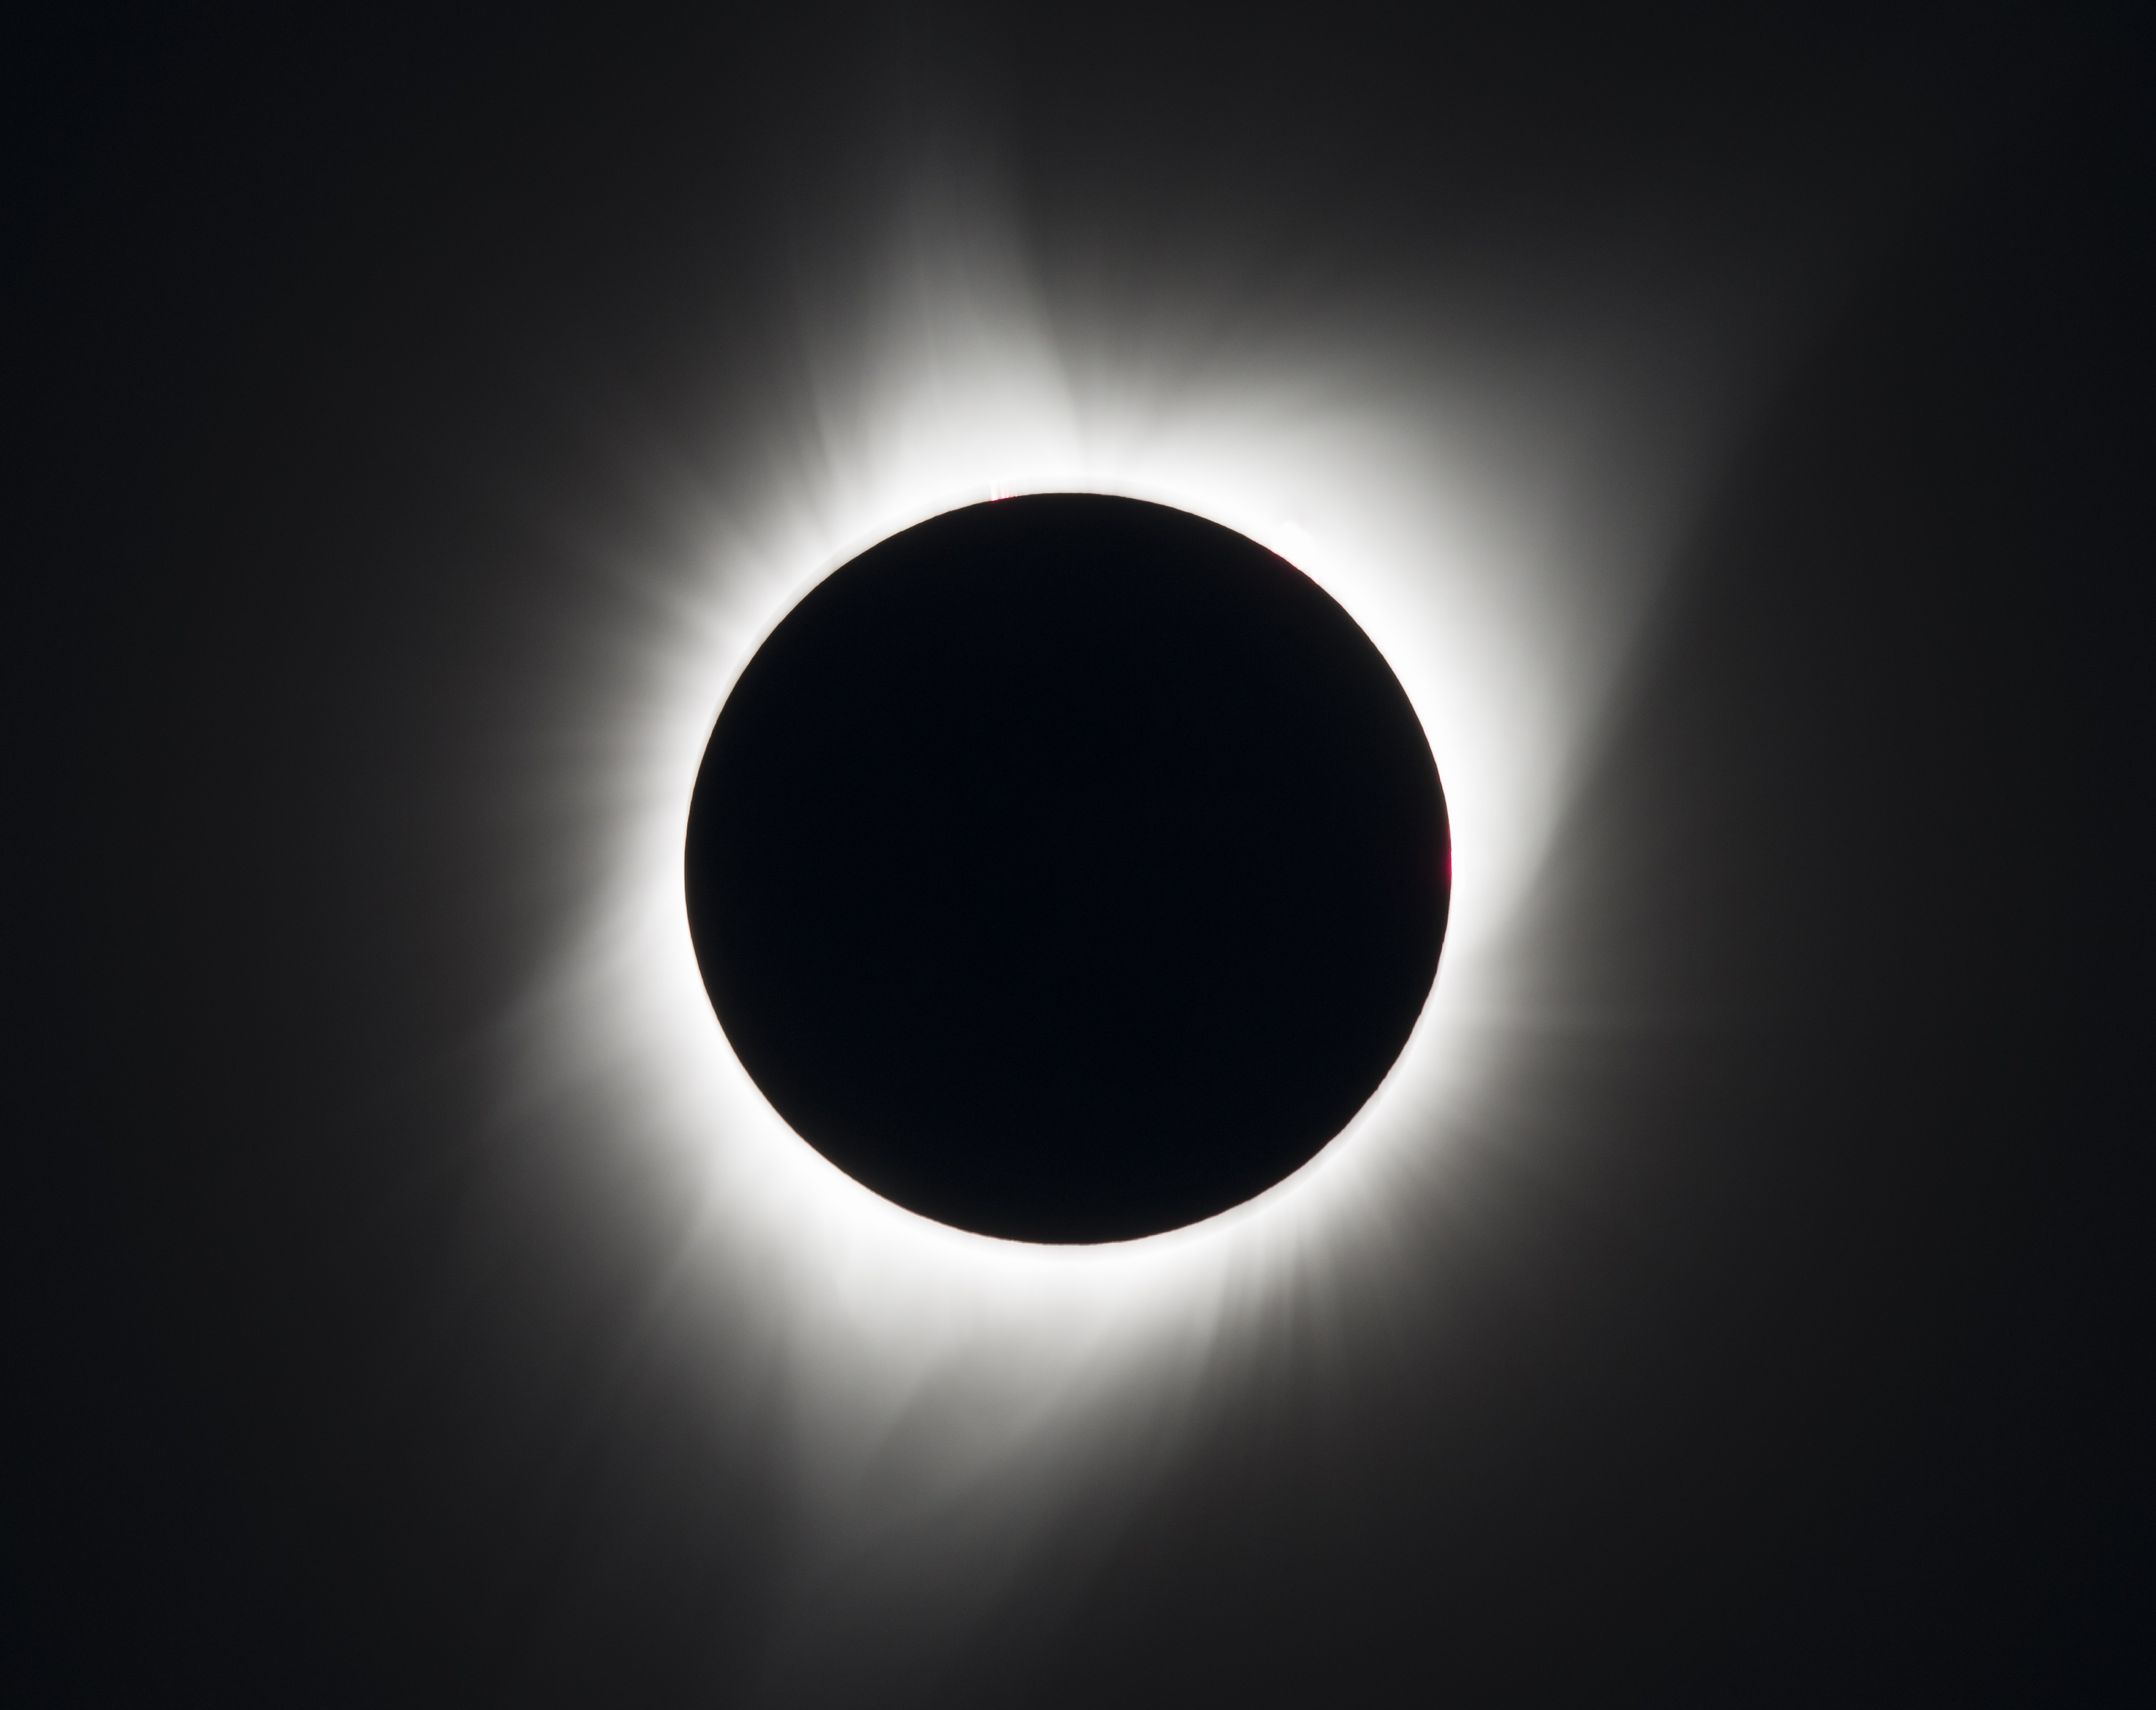 A total solar eclipse is seen on Monday, August 21, 2017 above Madras, Oregon. A total solar eclipse swept across a narrow portion of the contiguous United States from Lincoln Beach, Oregon to Charleston, South Carolina. A partial solar eclipse was visible across the entire North American continent along with parts of South America, Africa, and Europe. Mandatory Credit: Aubrey Gemignani / NASA via CNP - NO WIRE'SERVICE - Photo by: Aubrey Gemignani/picture-alliance/dpa/AP Images